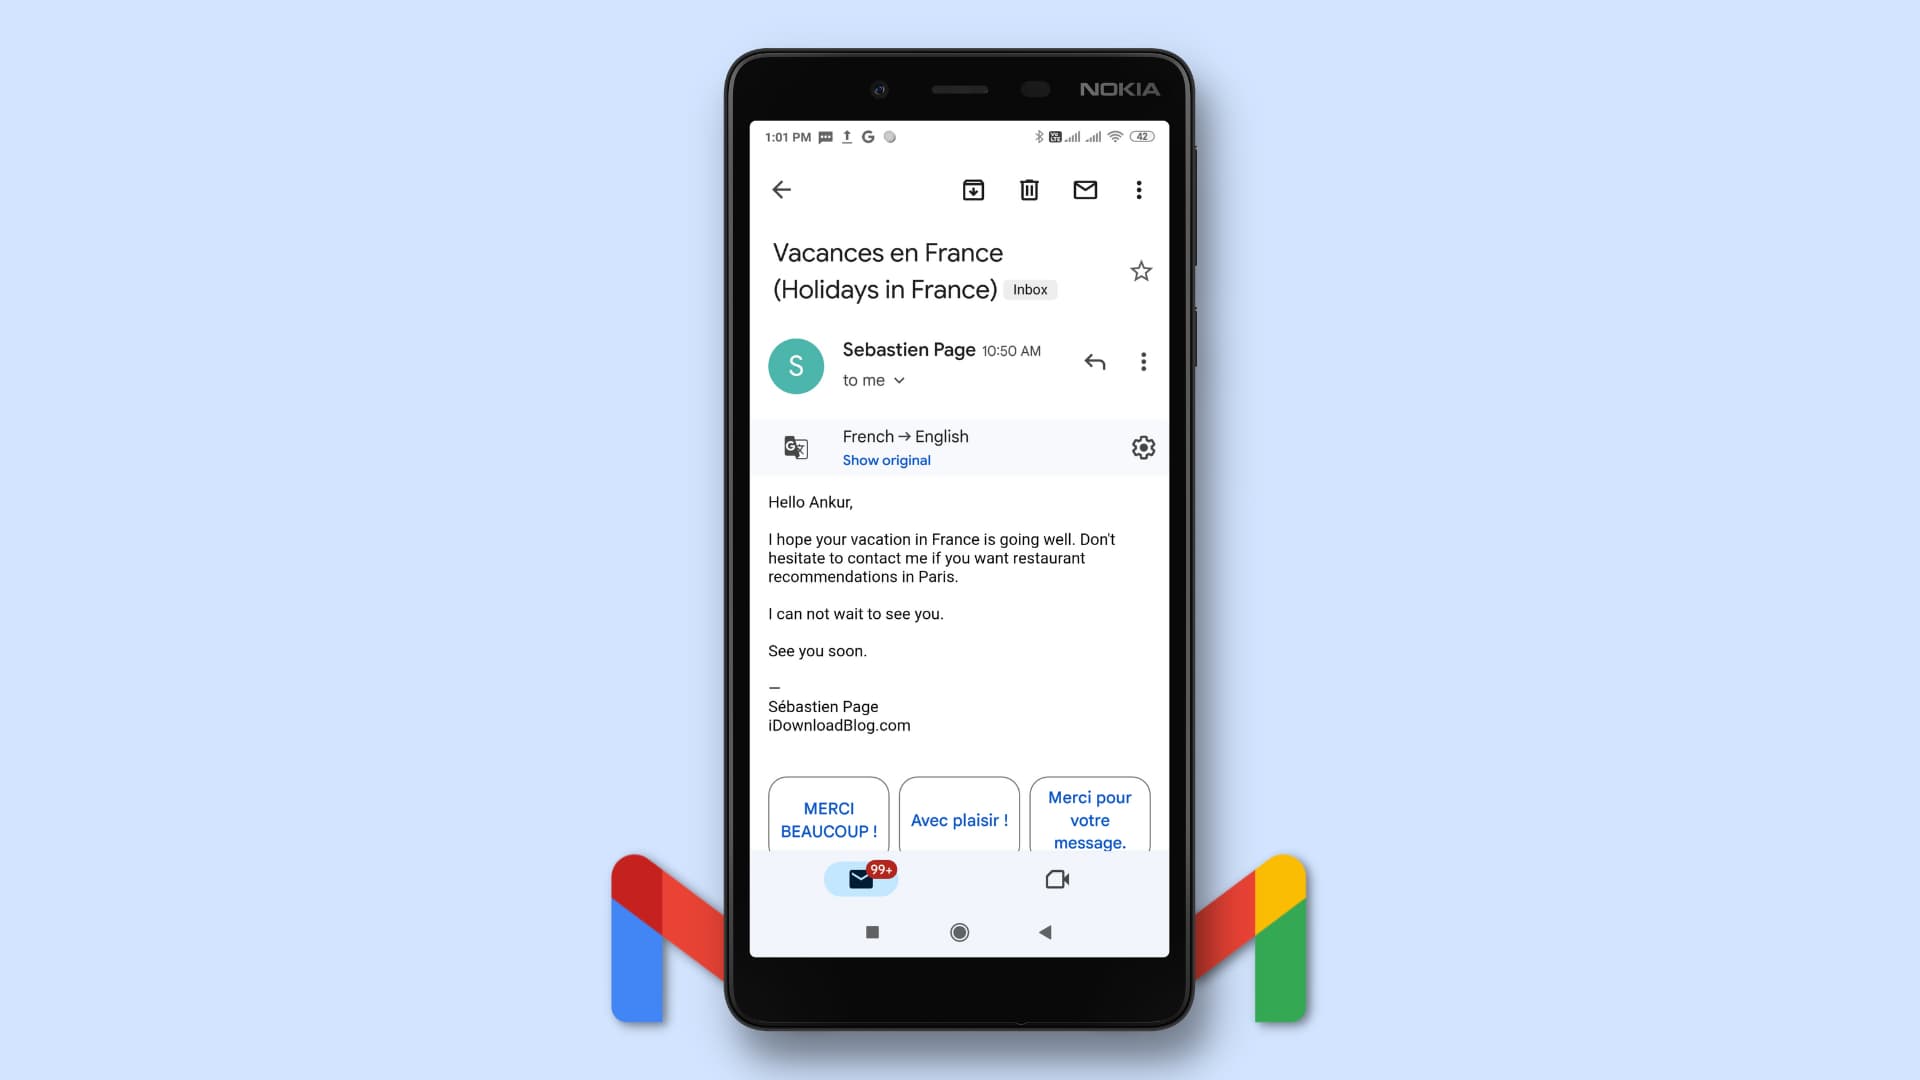 Gmail: Gmail for Mobile Devices